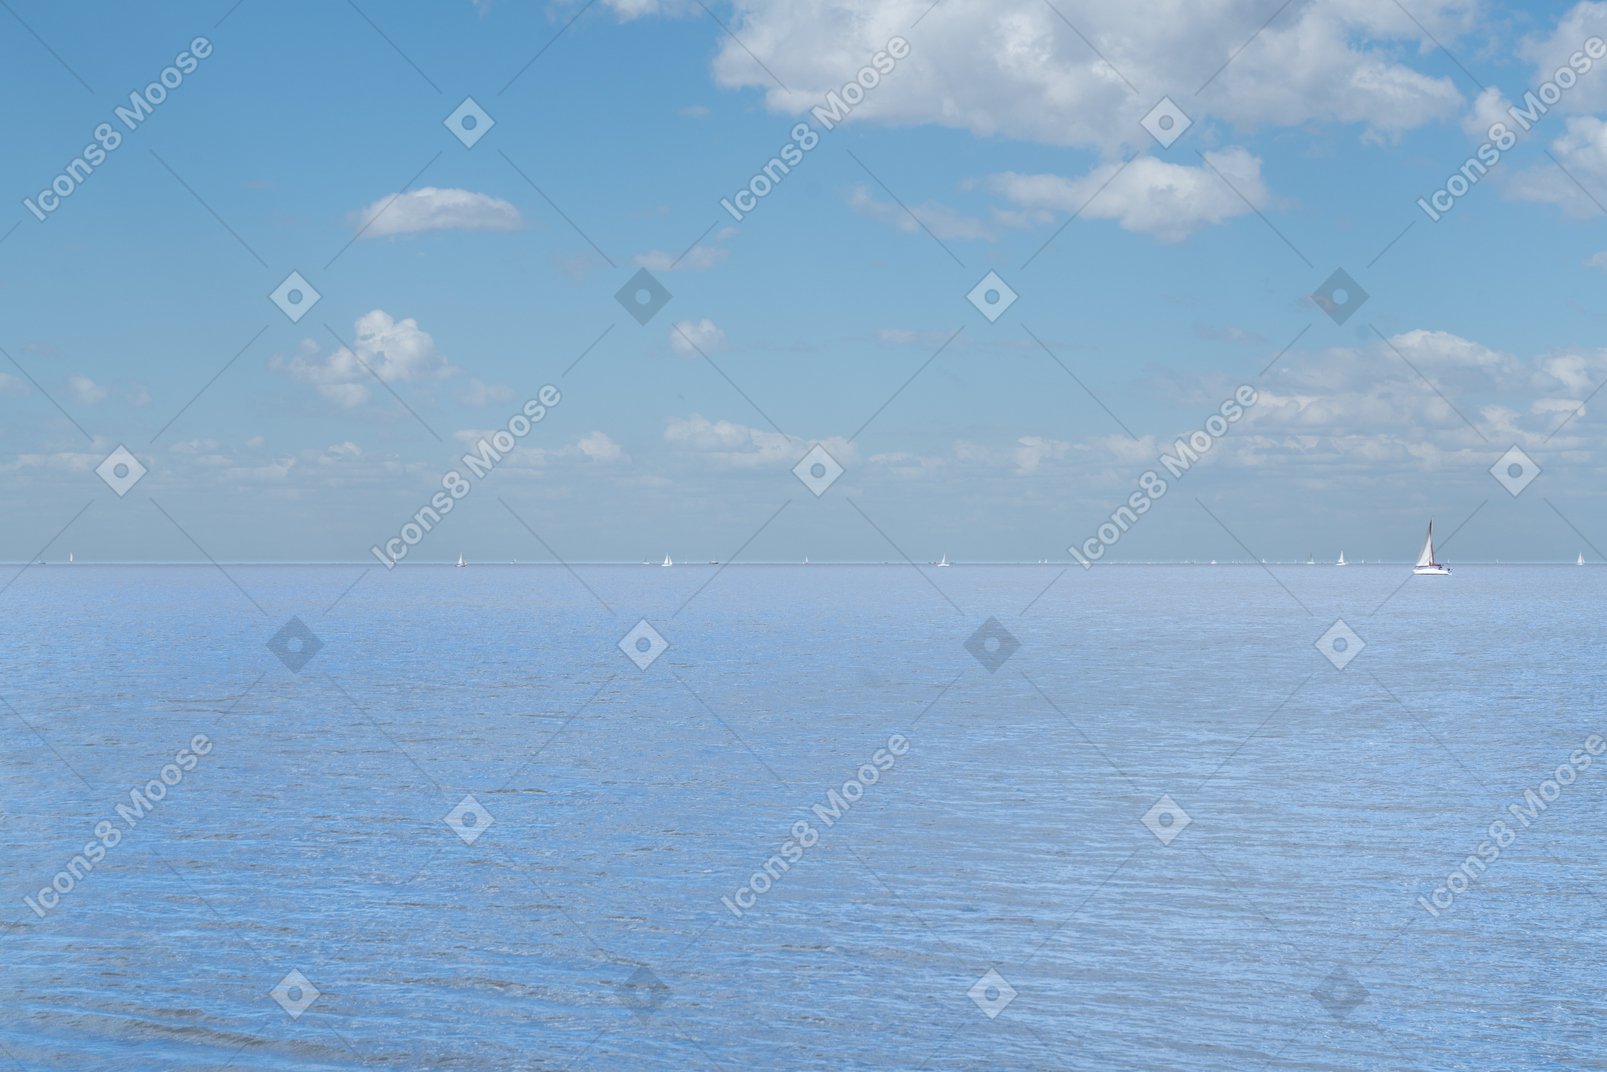 Blue sky and water surface connect